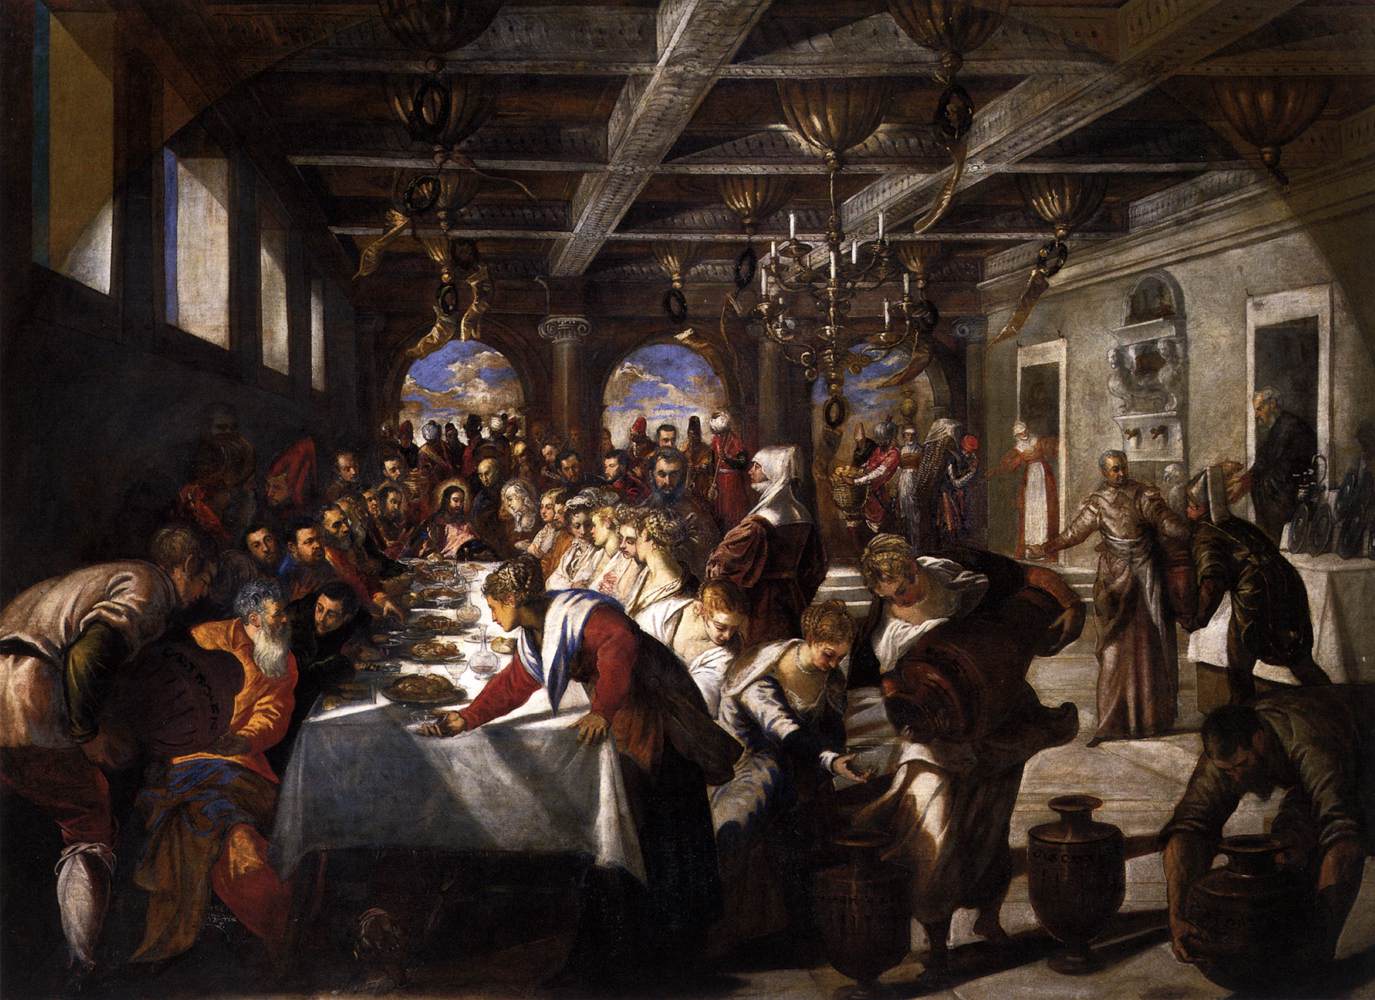 "Jacopo Tintoretto - Marriage at Cana - WGA22470" by Tintoretto - Web Gallery of Art:   Image  Info about artwork. Licensed under Public Domain via Commons